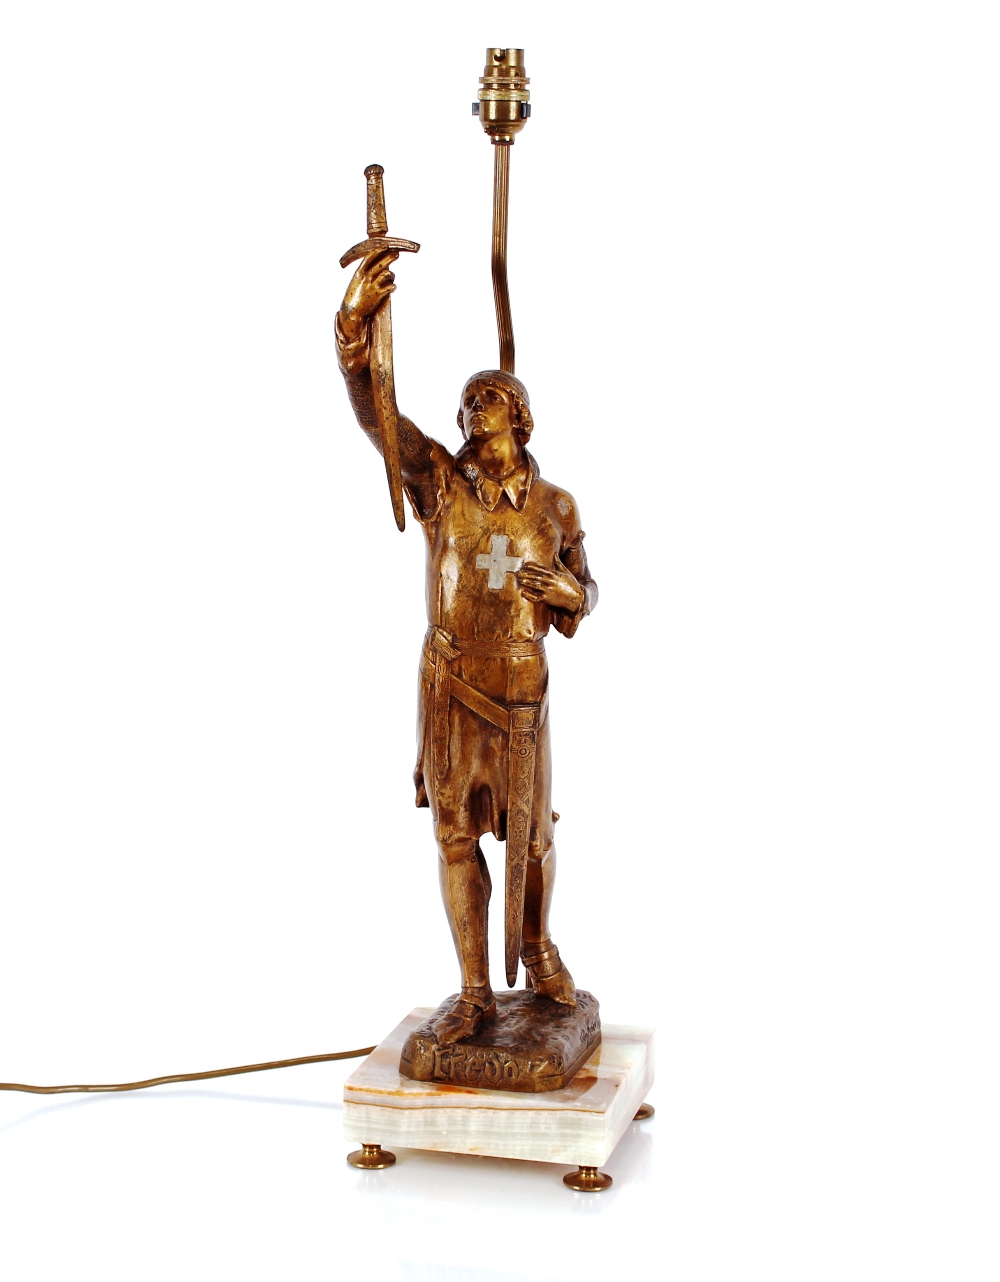 A bronze Joan of Arc lamp, signed J. Monier, complete with silk shade, 95cm high overall, originally